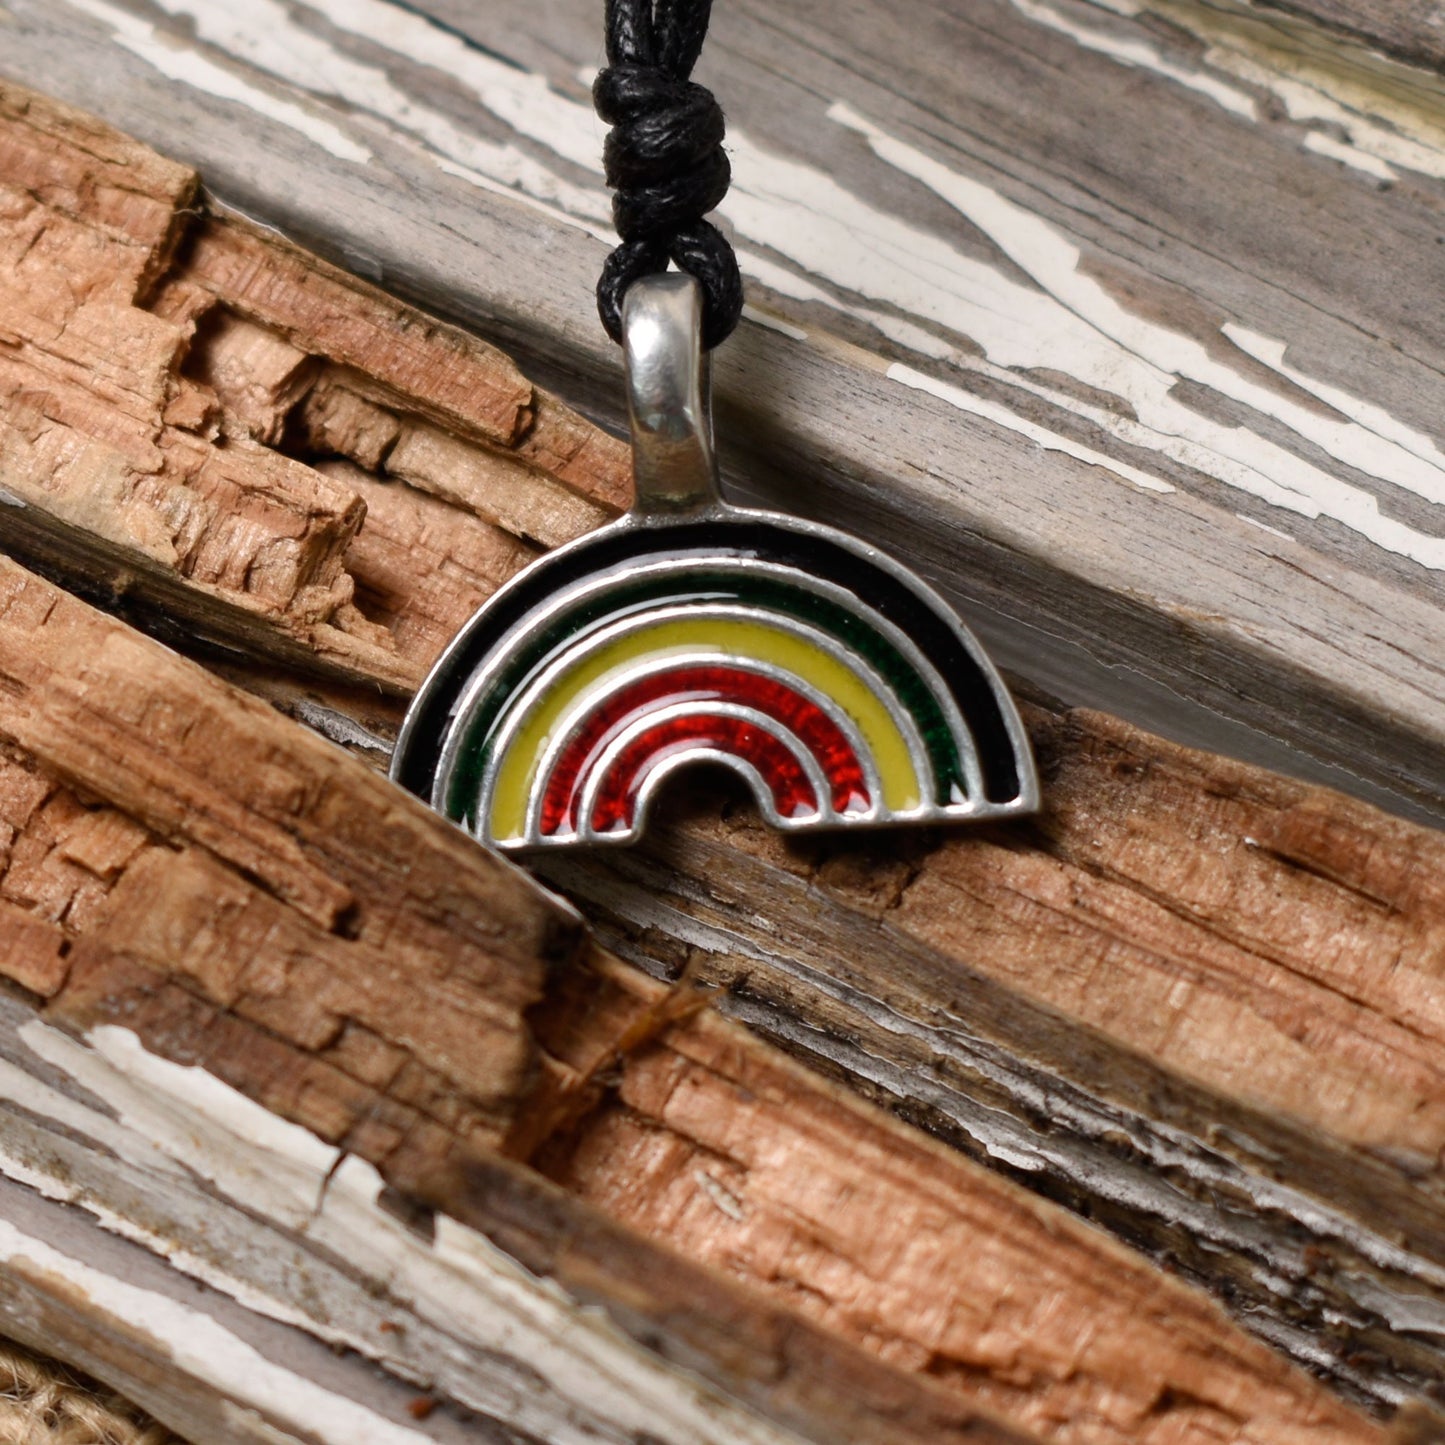 Lovely Rainbow Gay Marriage LGBTQ Silver Pewter Charm Necklace Pendant Jewelry